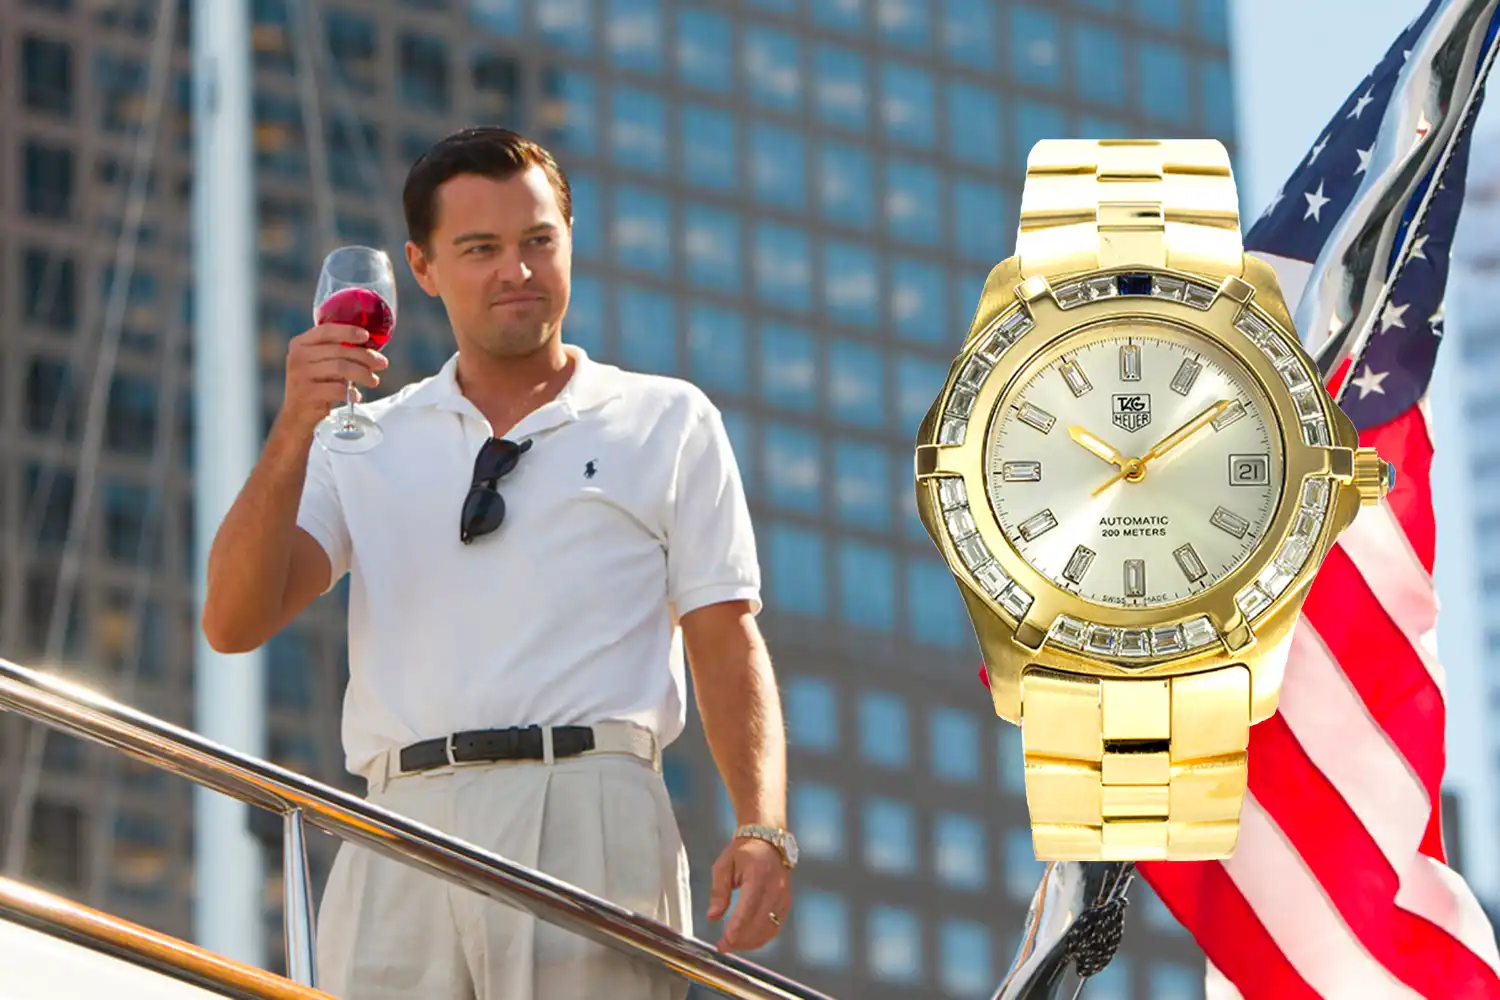 All The Watches In The Wolf Of Wall Street Italian Watch Spotter image